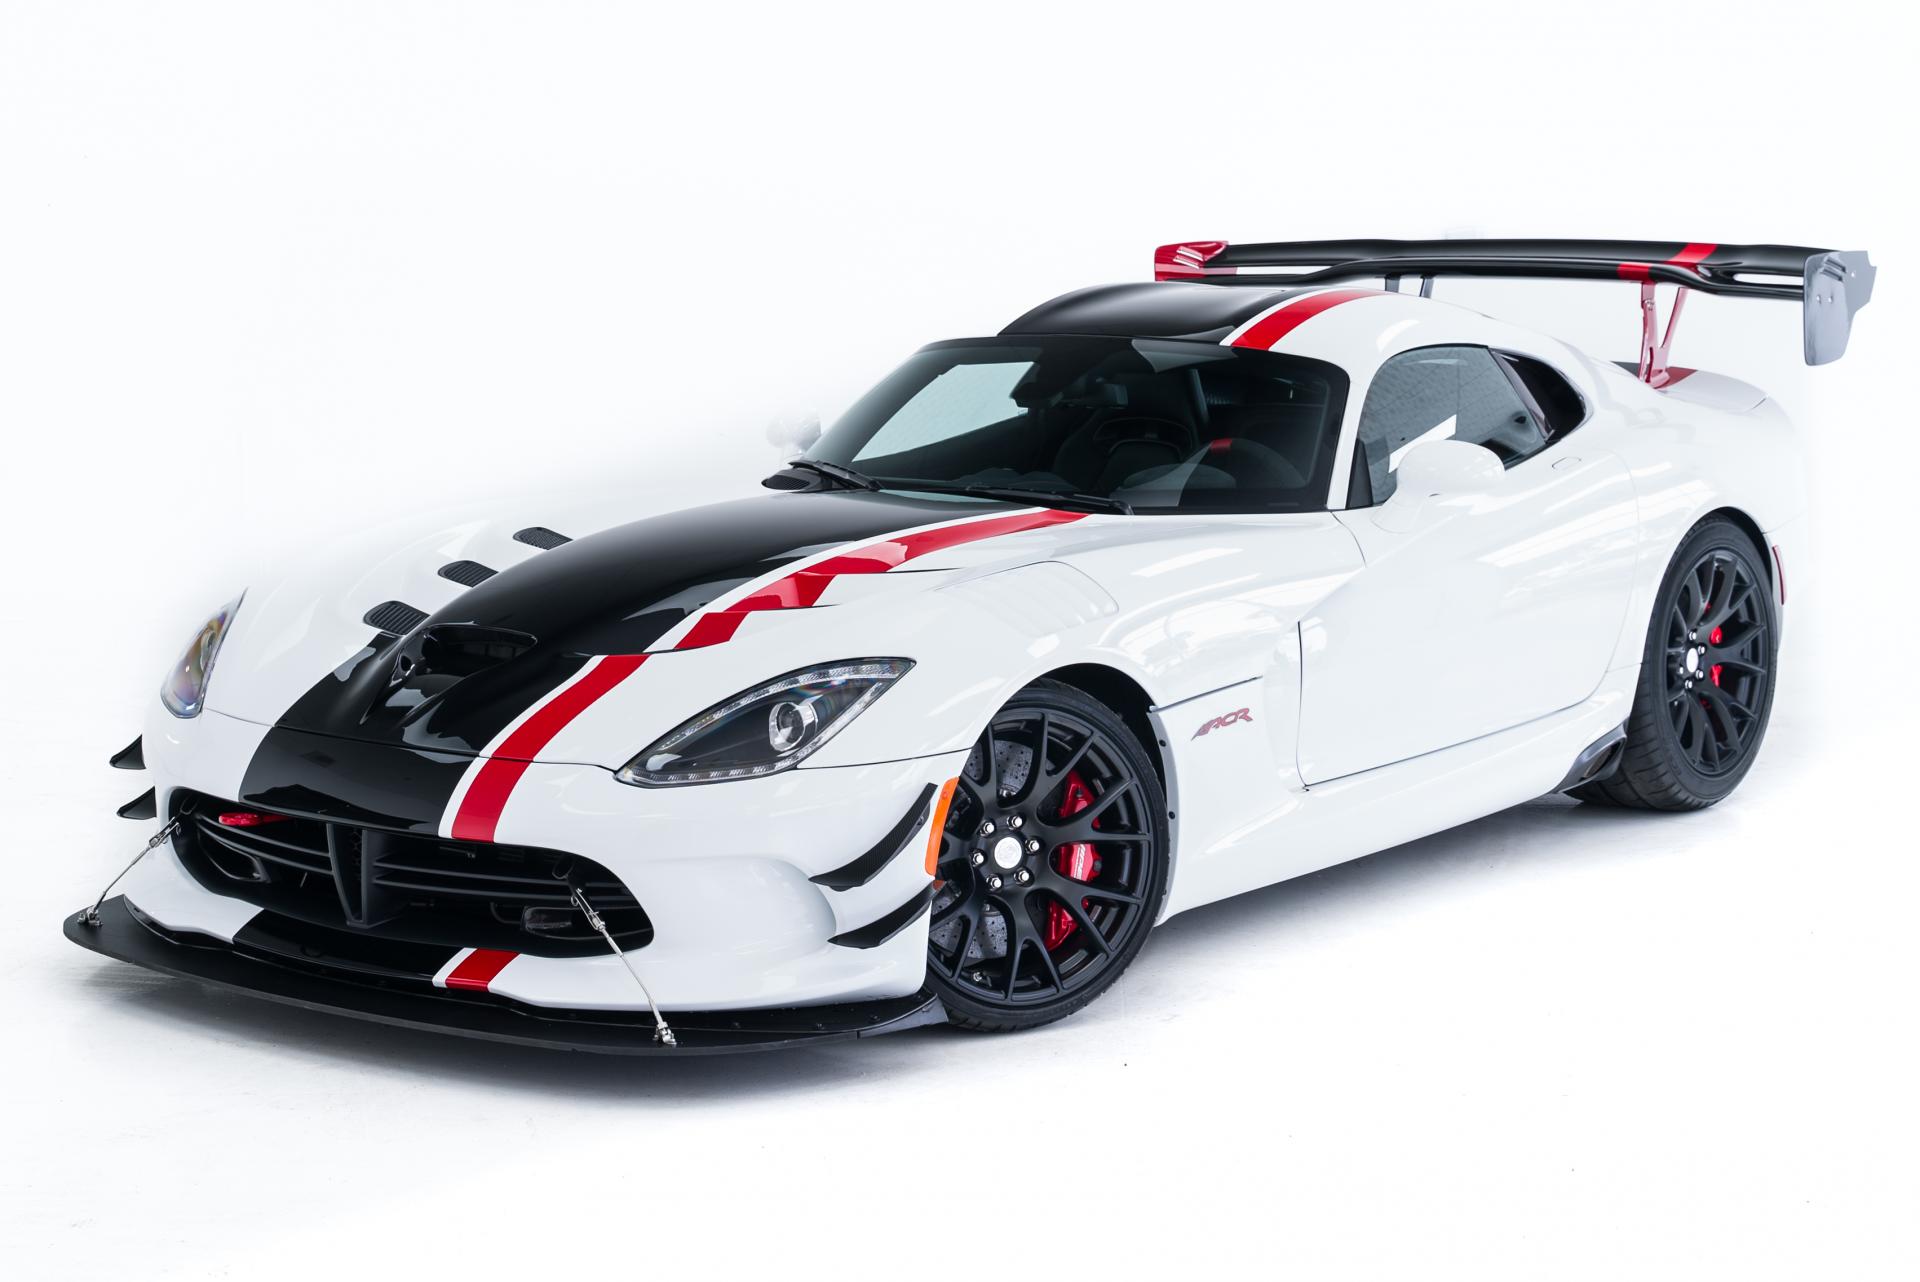 Used 16 Dodge Viper Acr For Sale Sold West Coast Exotic Cars Stock C1350